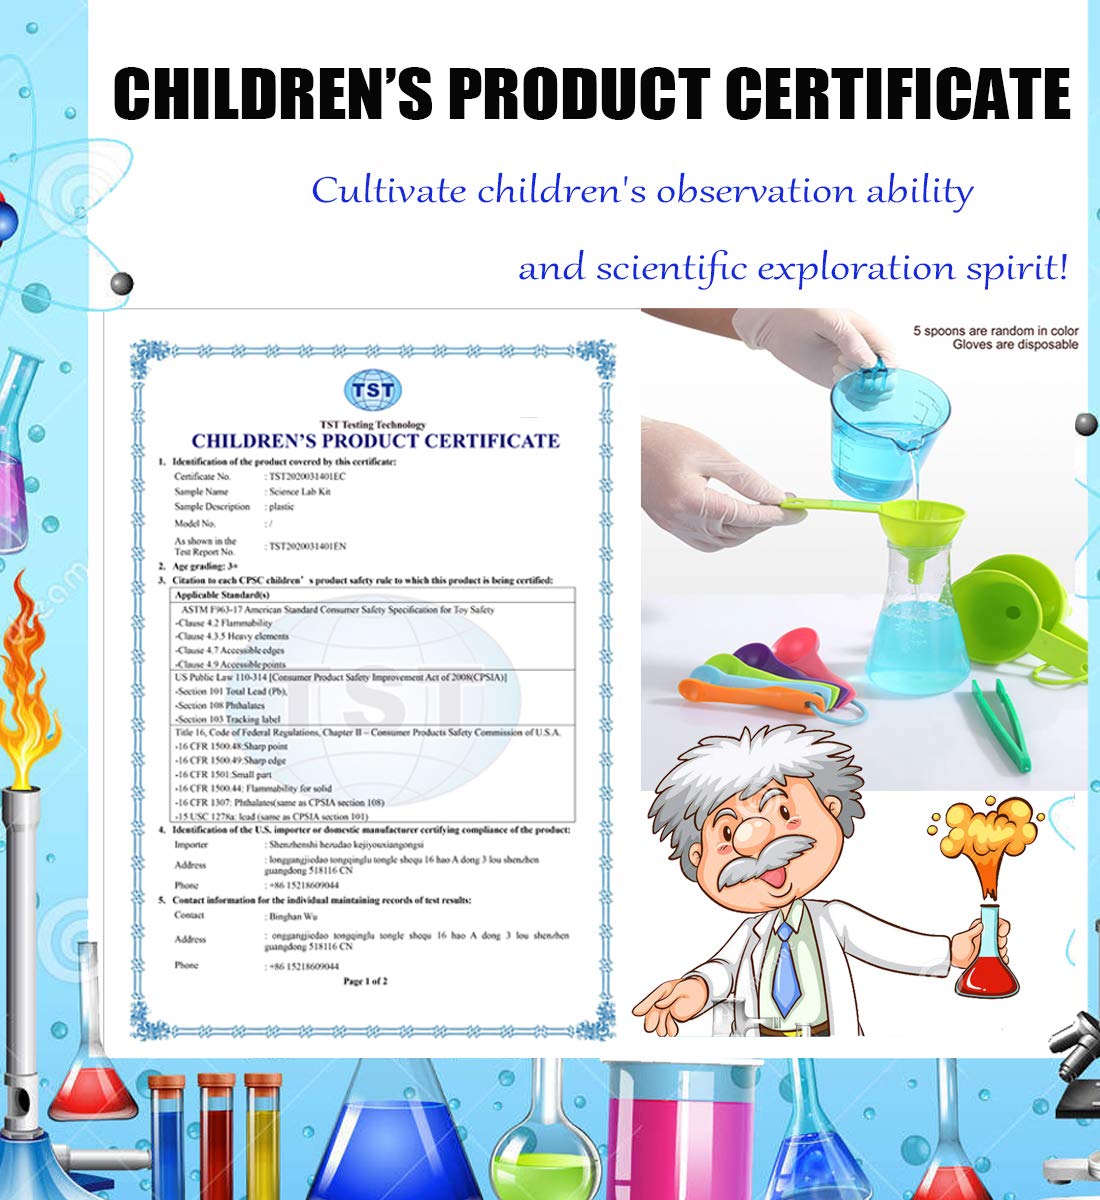 UNGLINGA Kids Science Experiment Kit with Lab Coat Scientist Costume Dress Up and Role Play Toys Gift for Boys Girls Kids Age 5-11 Christmas Birthday Party